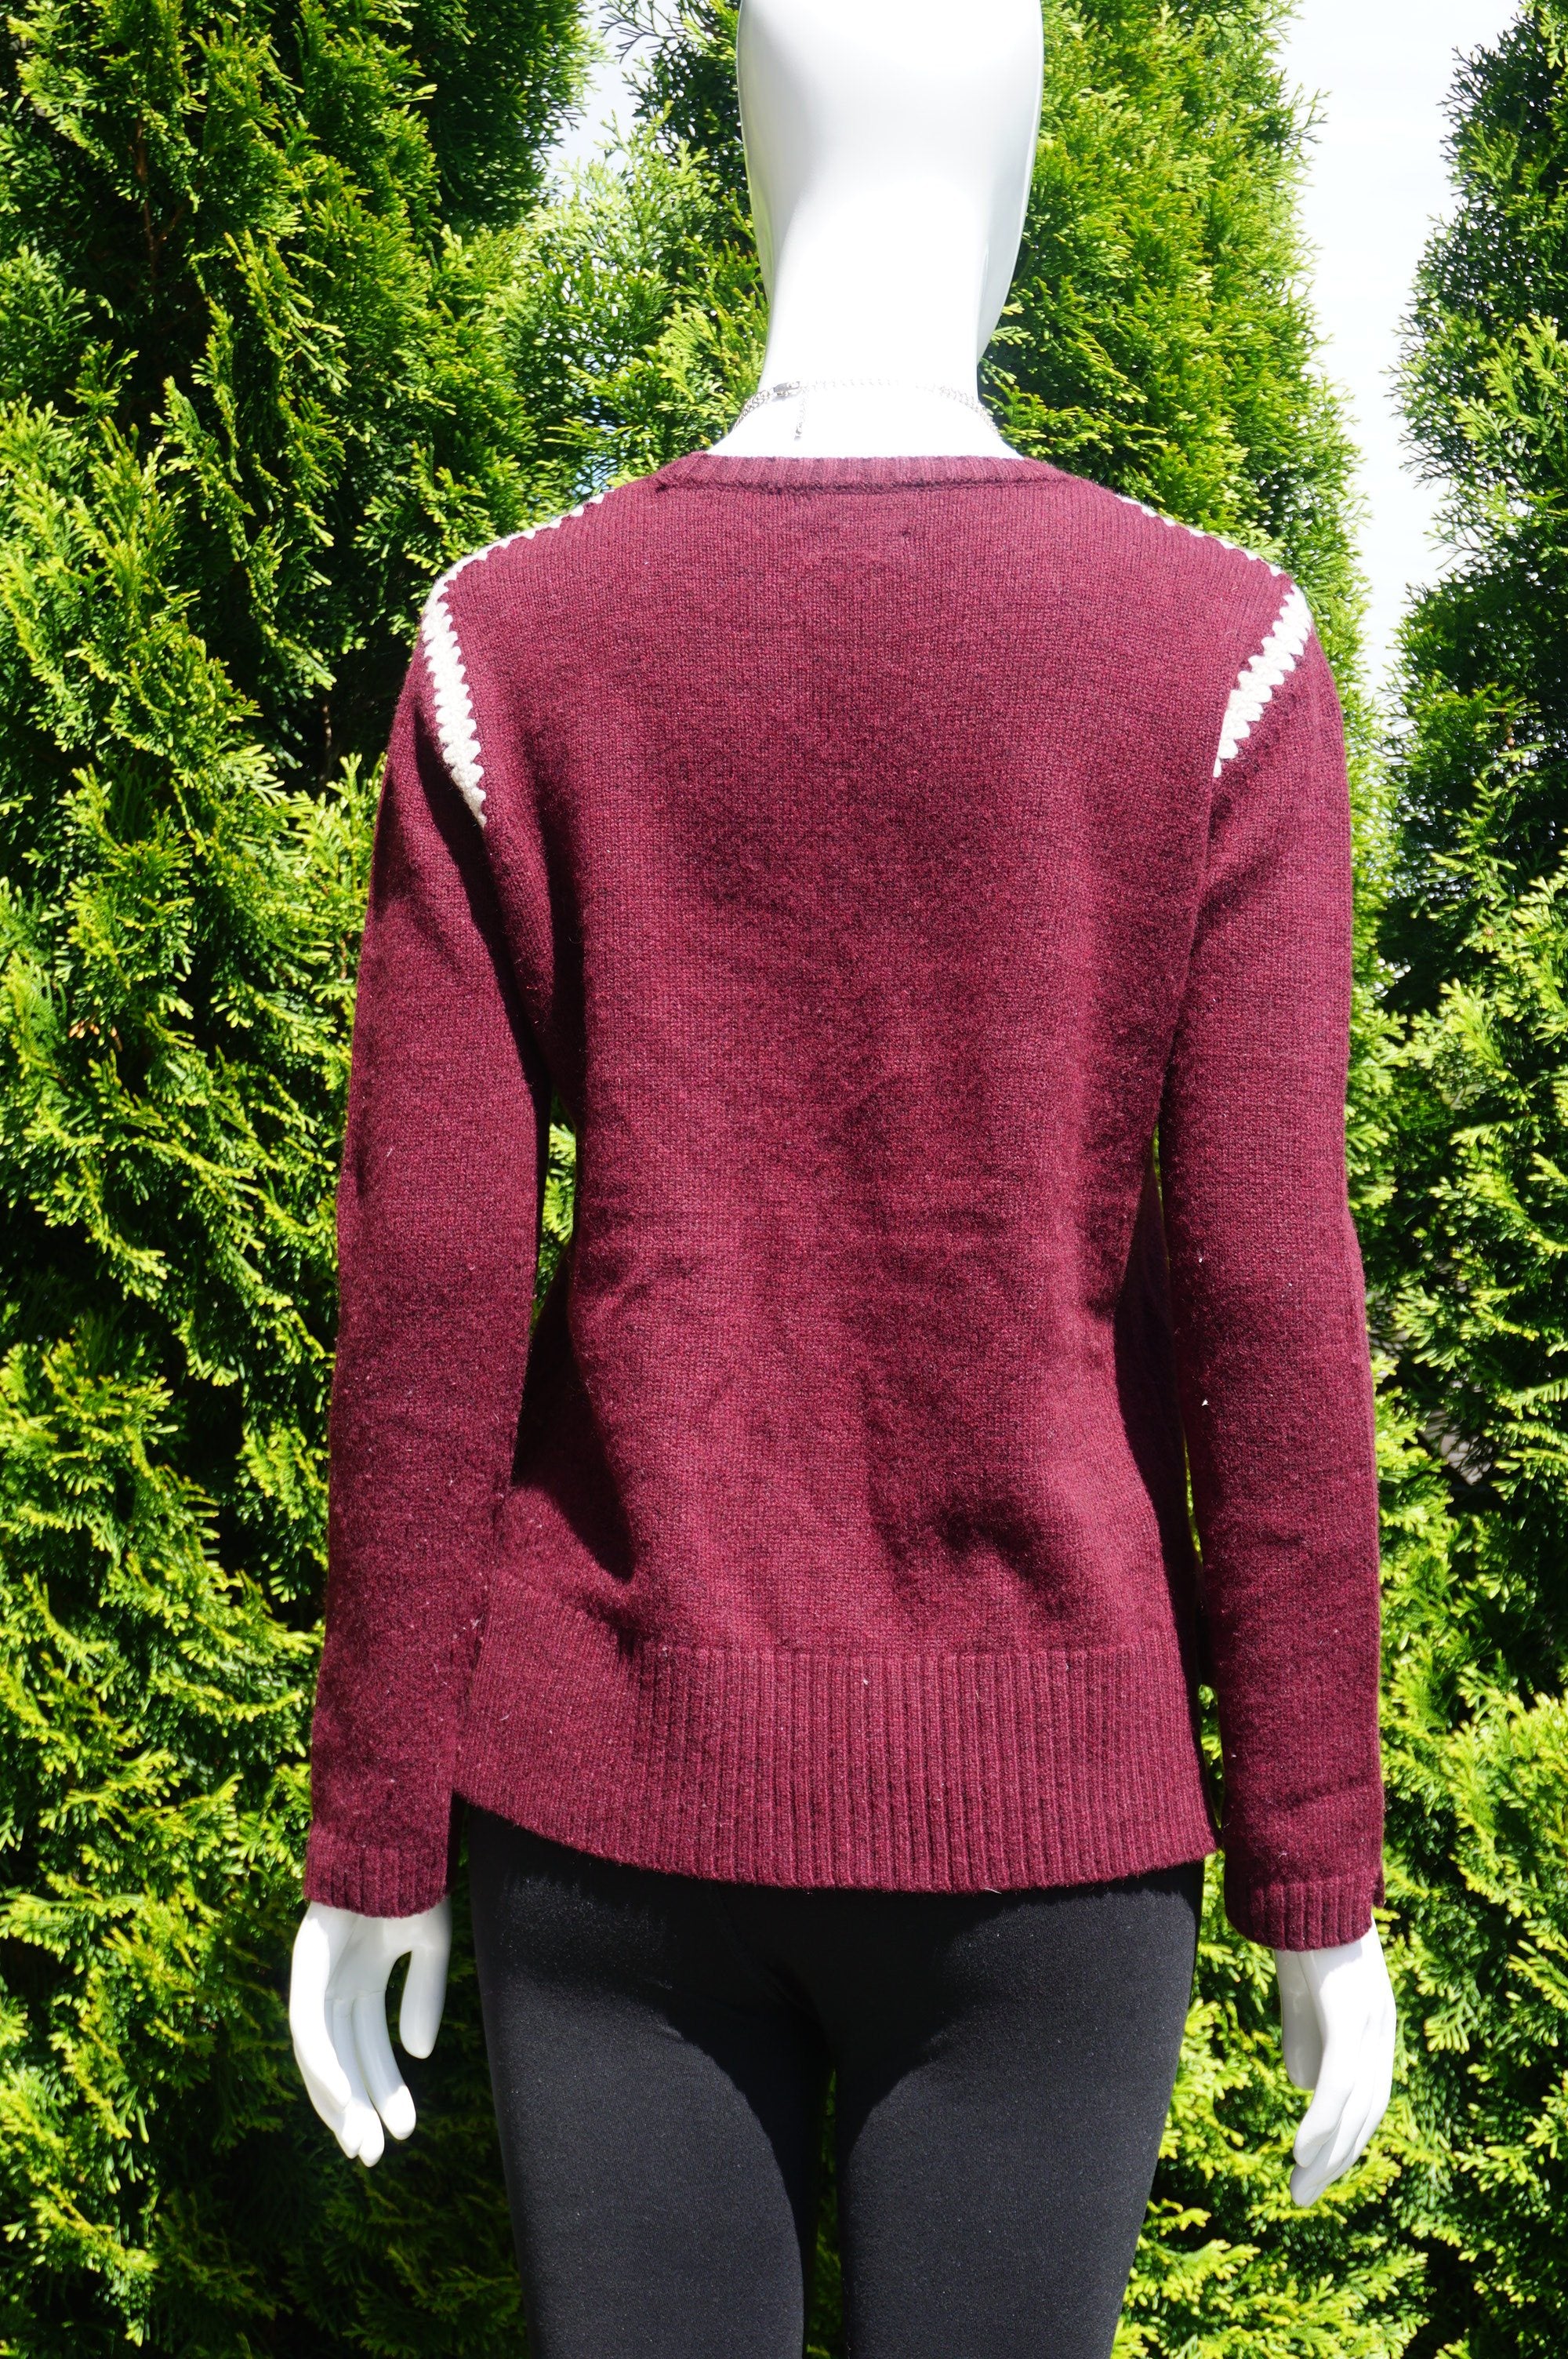 Massimo Dutti Round Neck Sweater With Side Slits, Comfortable sweater made with cashmere and wool blend., Red, Wool Cashmere, women's Tops, women's Red Tops, Massimo Dutti women's Tops, sweater, winter top, winter sweater, cashmere sweater, wool sweater,